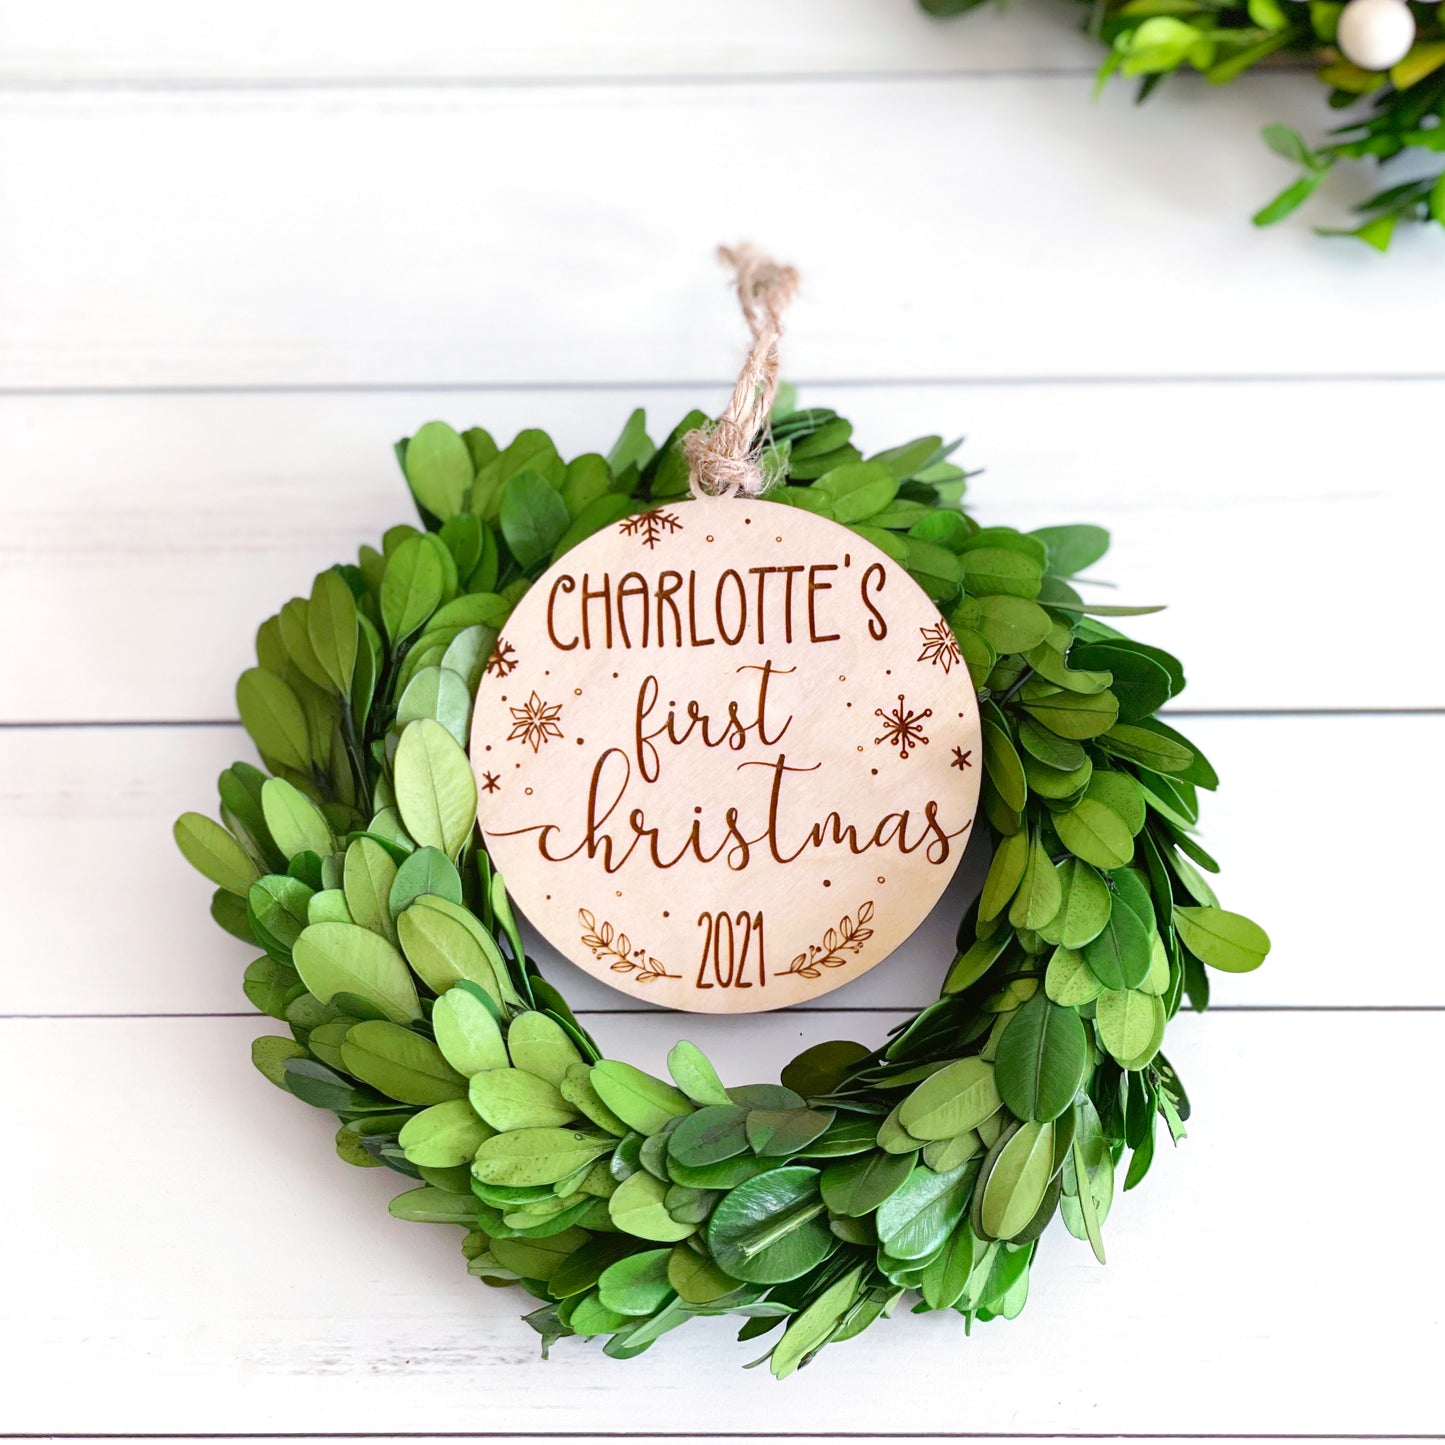 Baby's first Christmas engraved keepsake wooden ornament